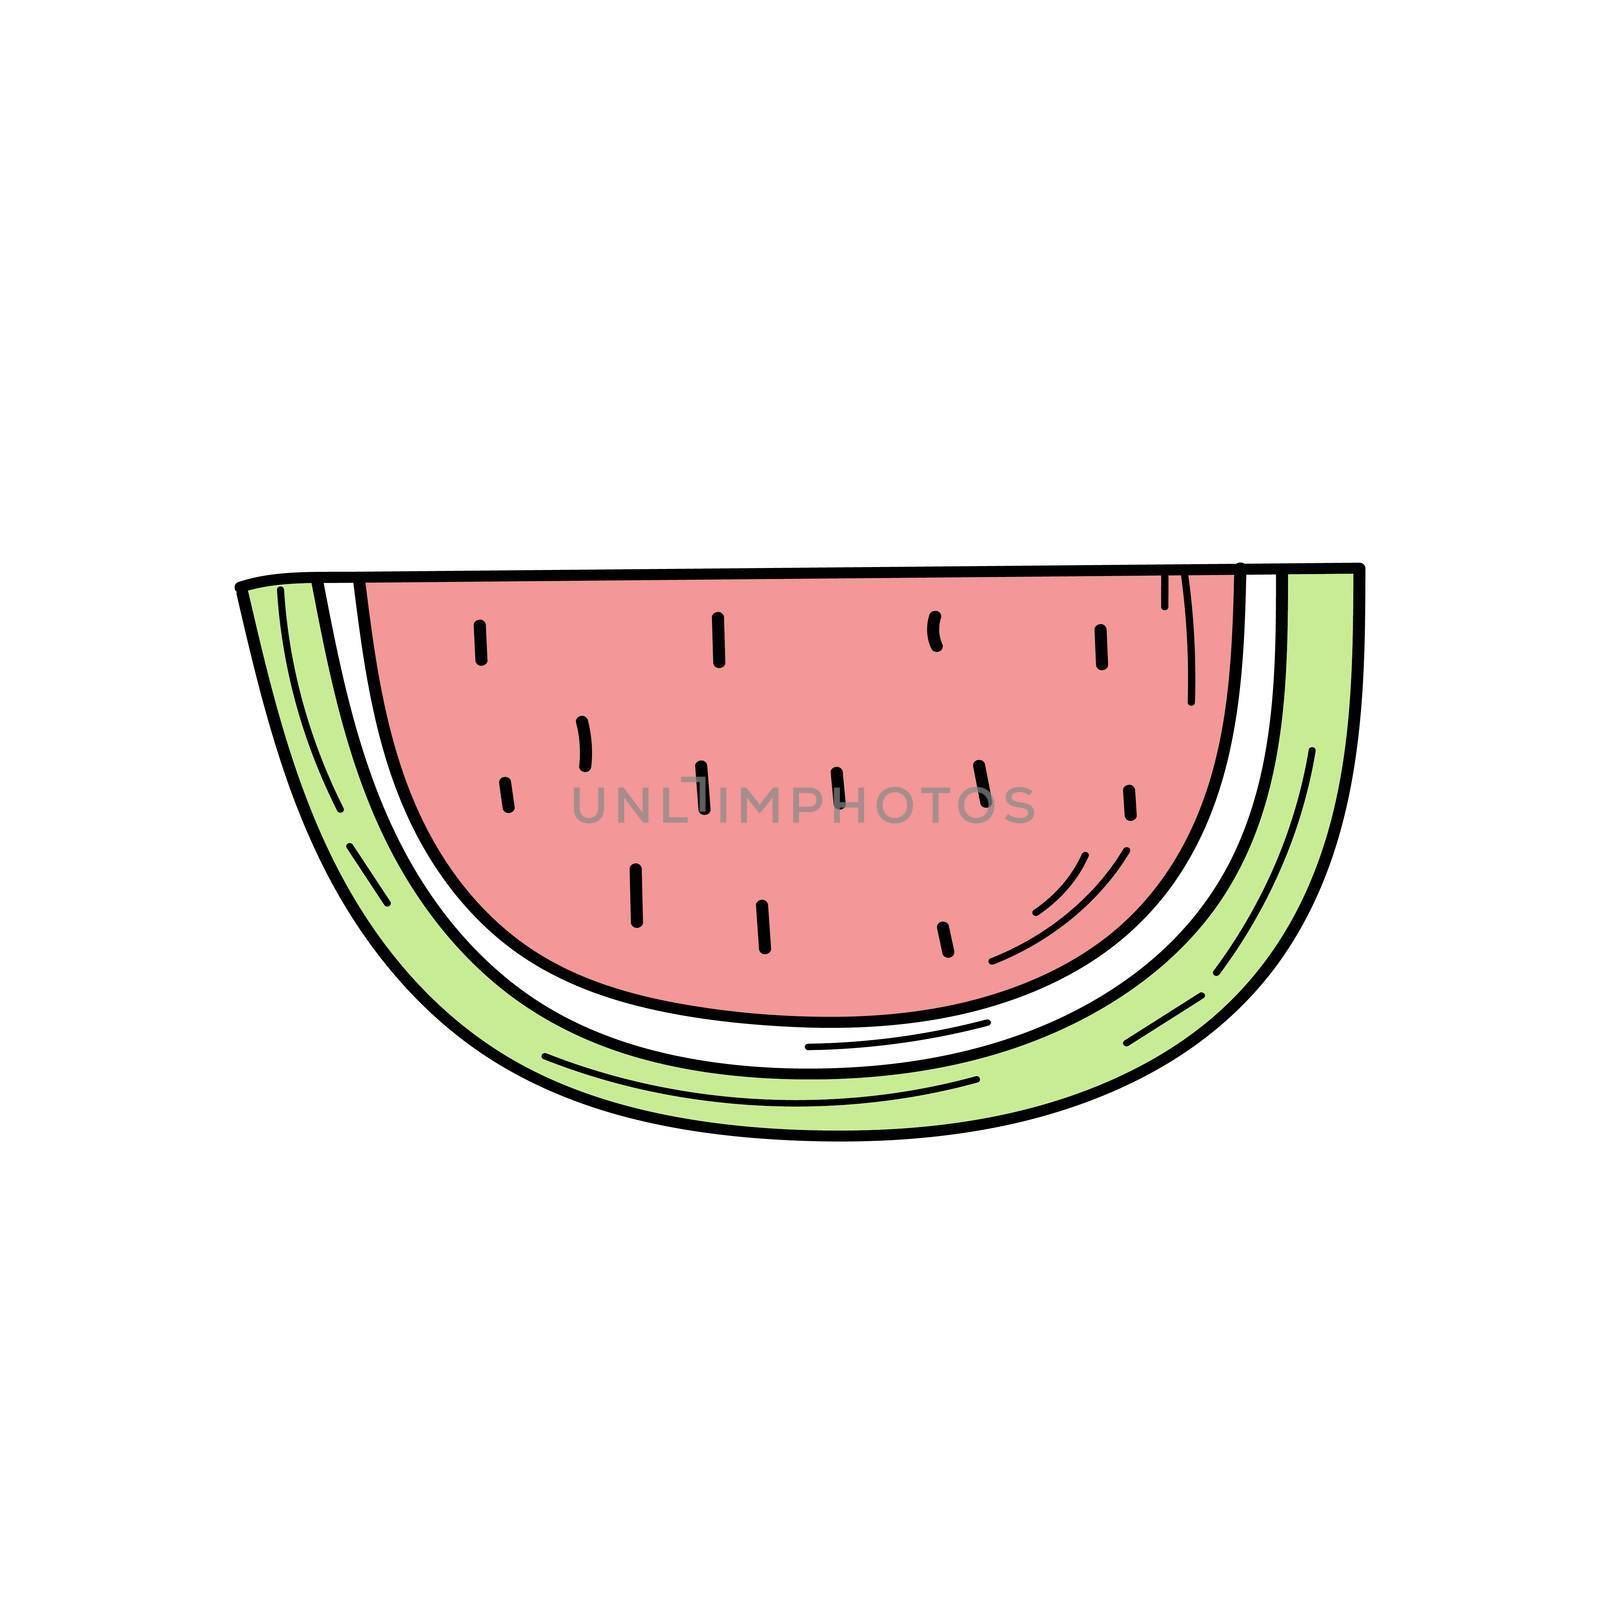 Watermelon Doodle icon. Simple hand drawn Watermelon icon on white. Summer image